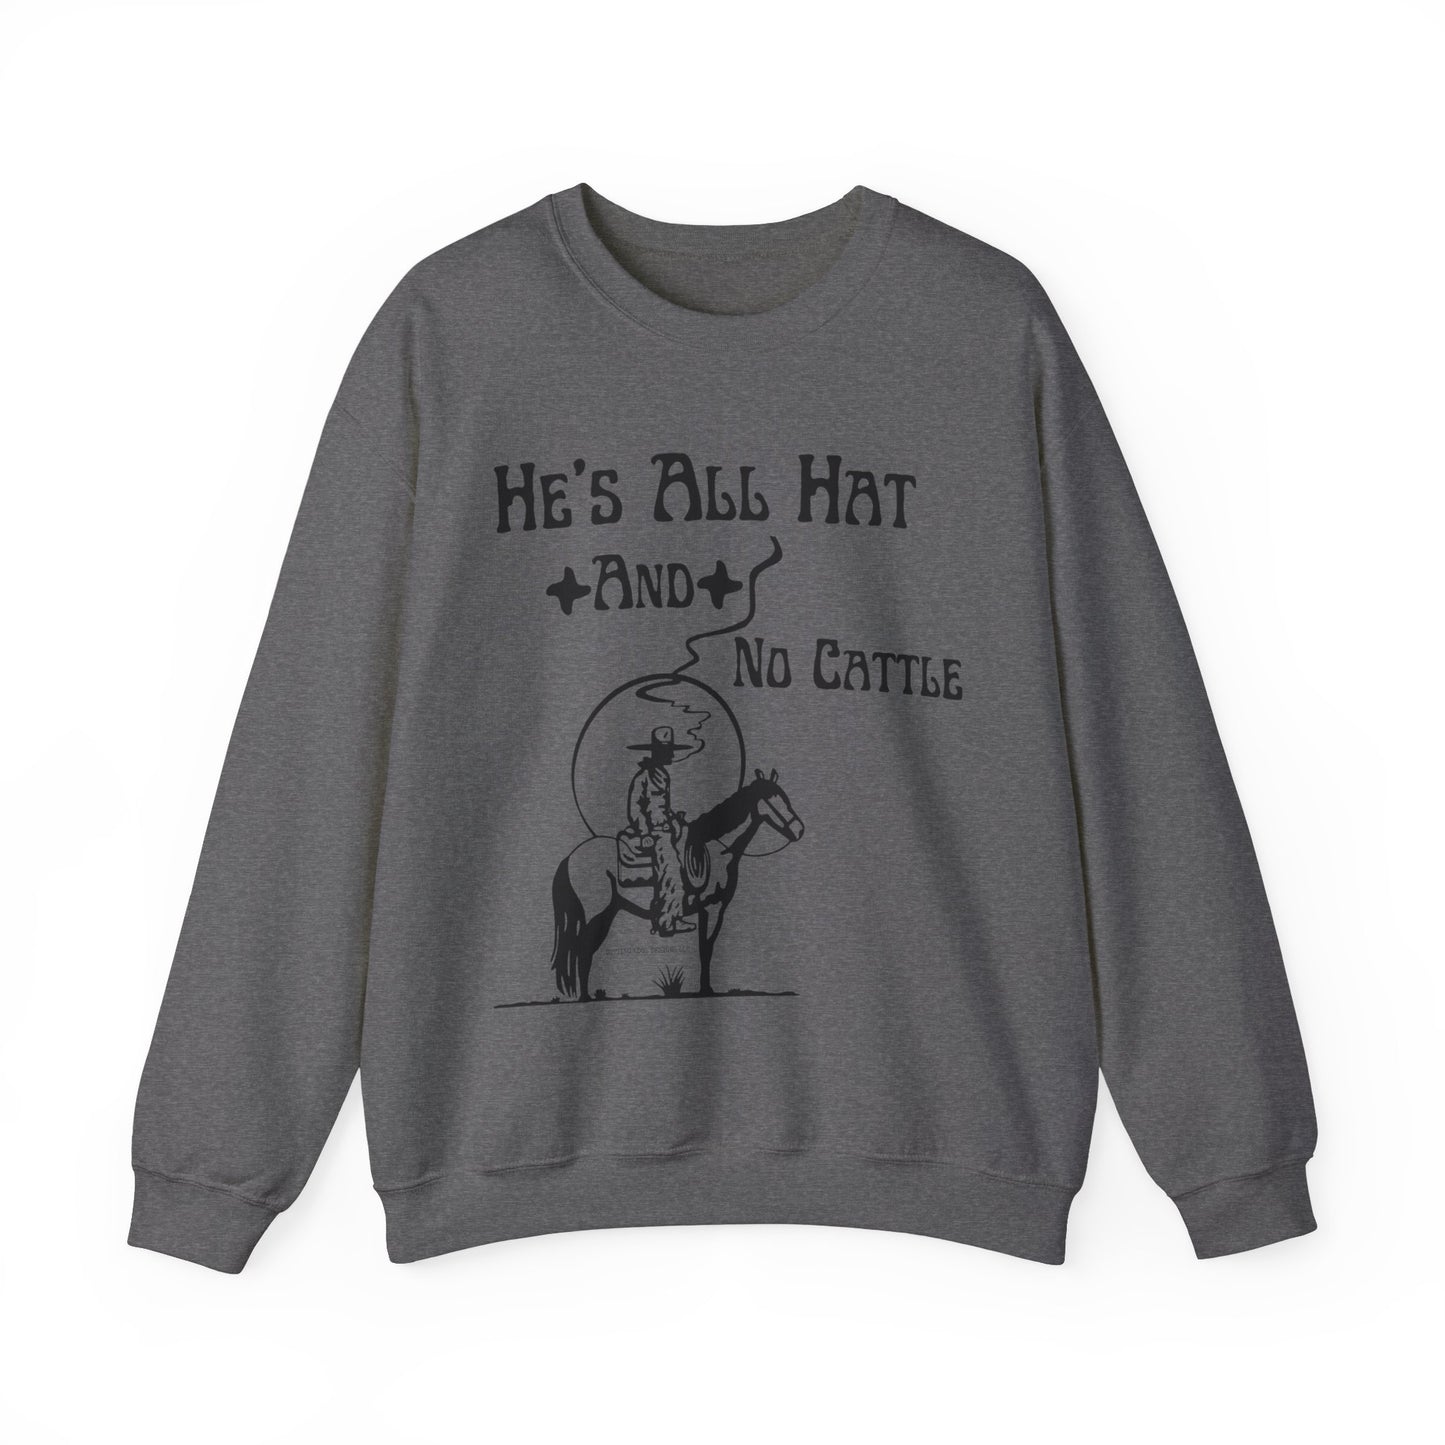 He’s All Hat & No Cattle Crewneck